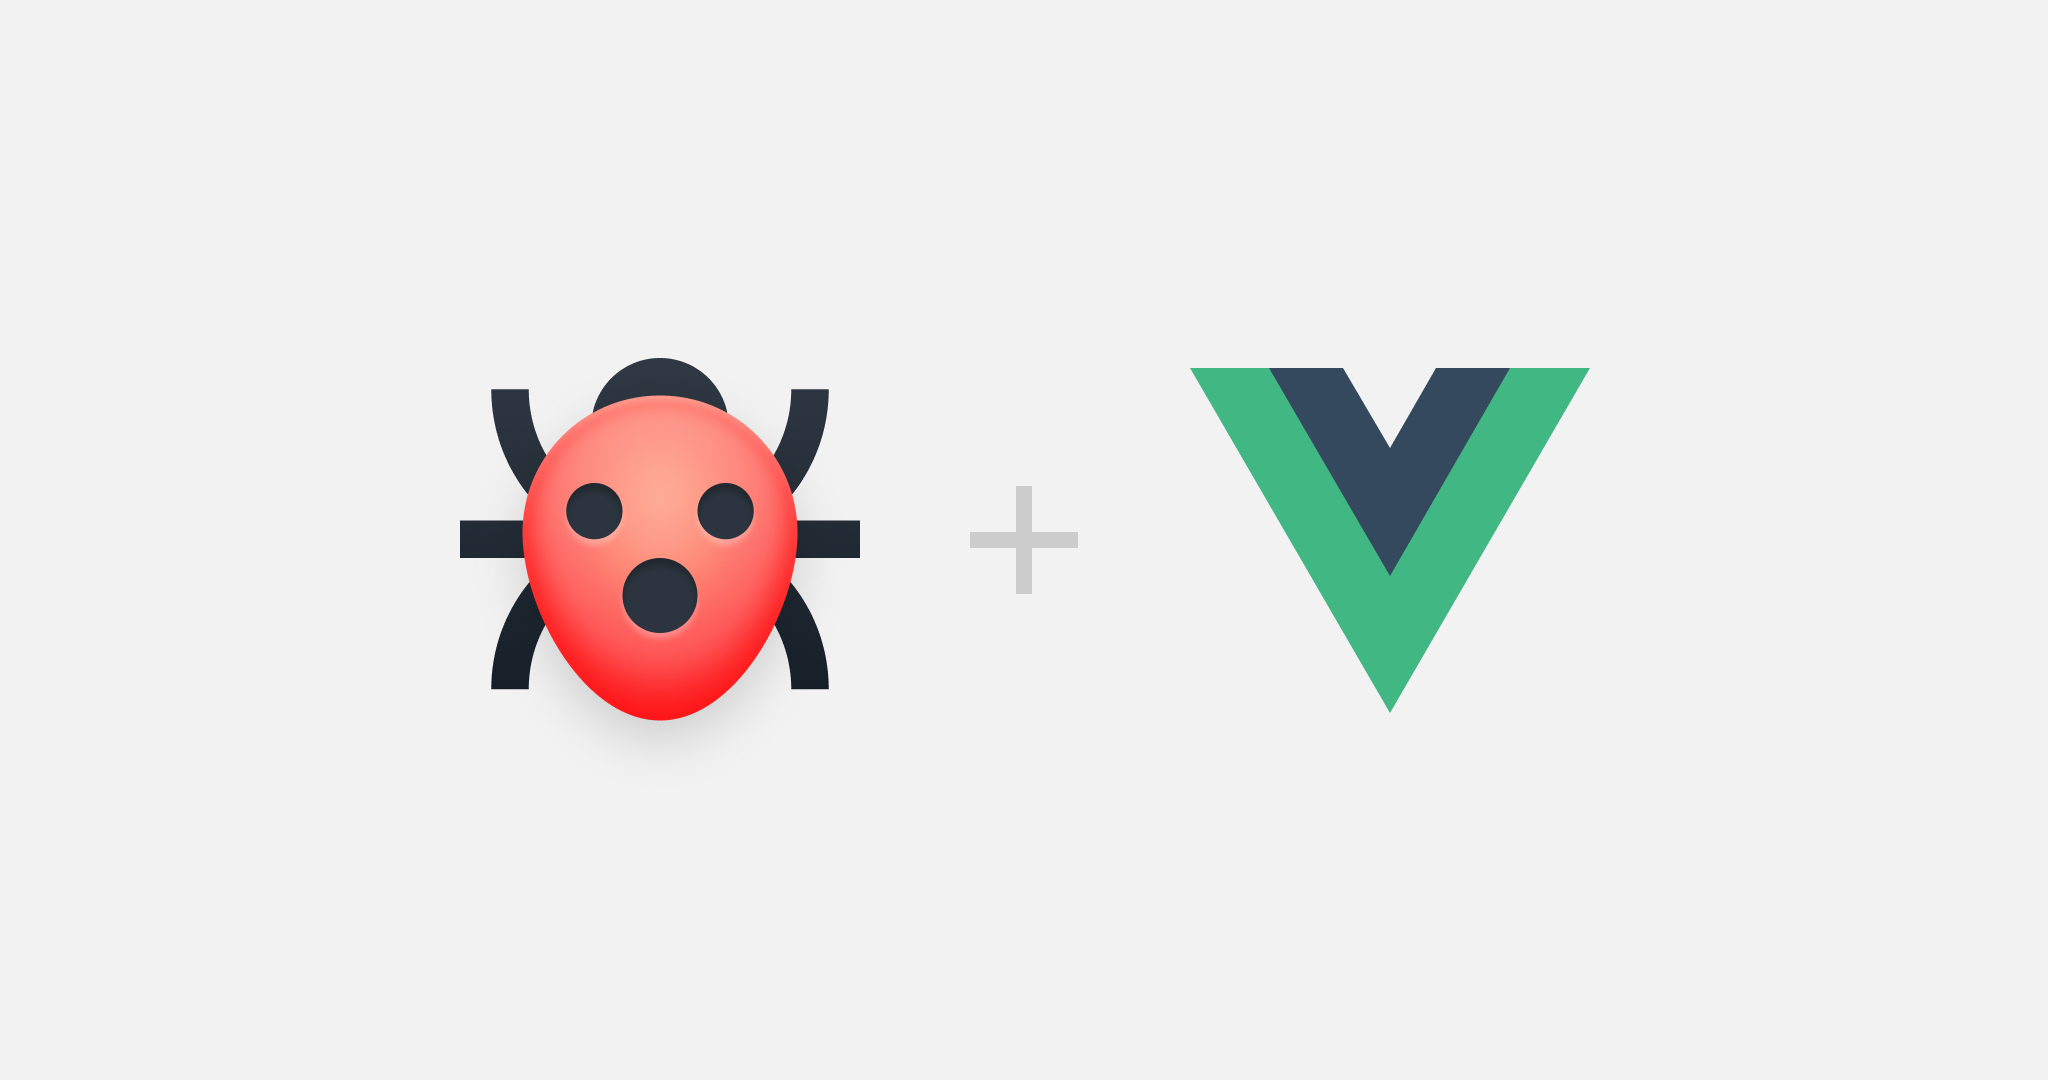 Using the CodyHouse components with Vue.js